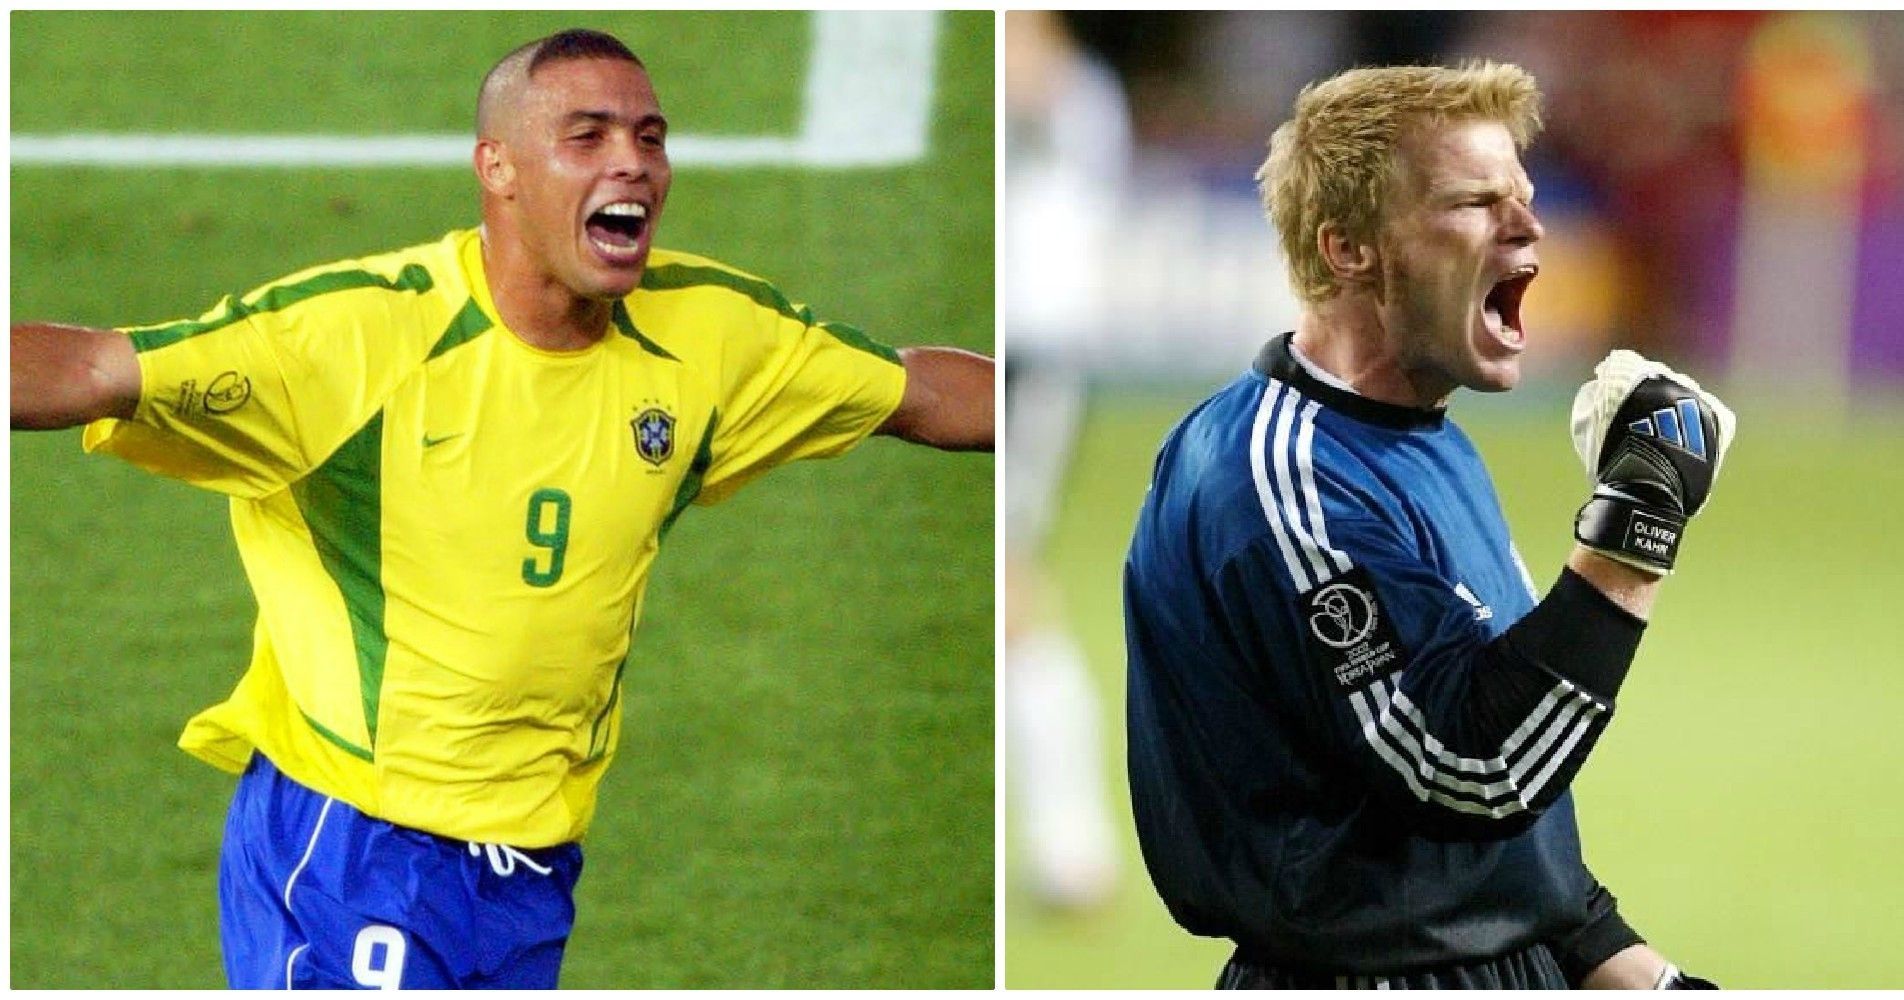 Legend Vs Legend On This Day In 2002 Ronaldo Pierced The Wall Named Oliver Kahn To Give Brazil Their 5th Fifa World Cup